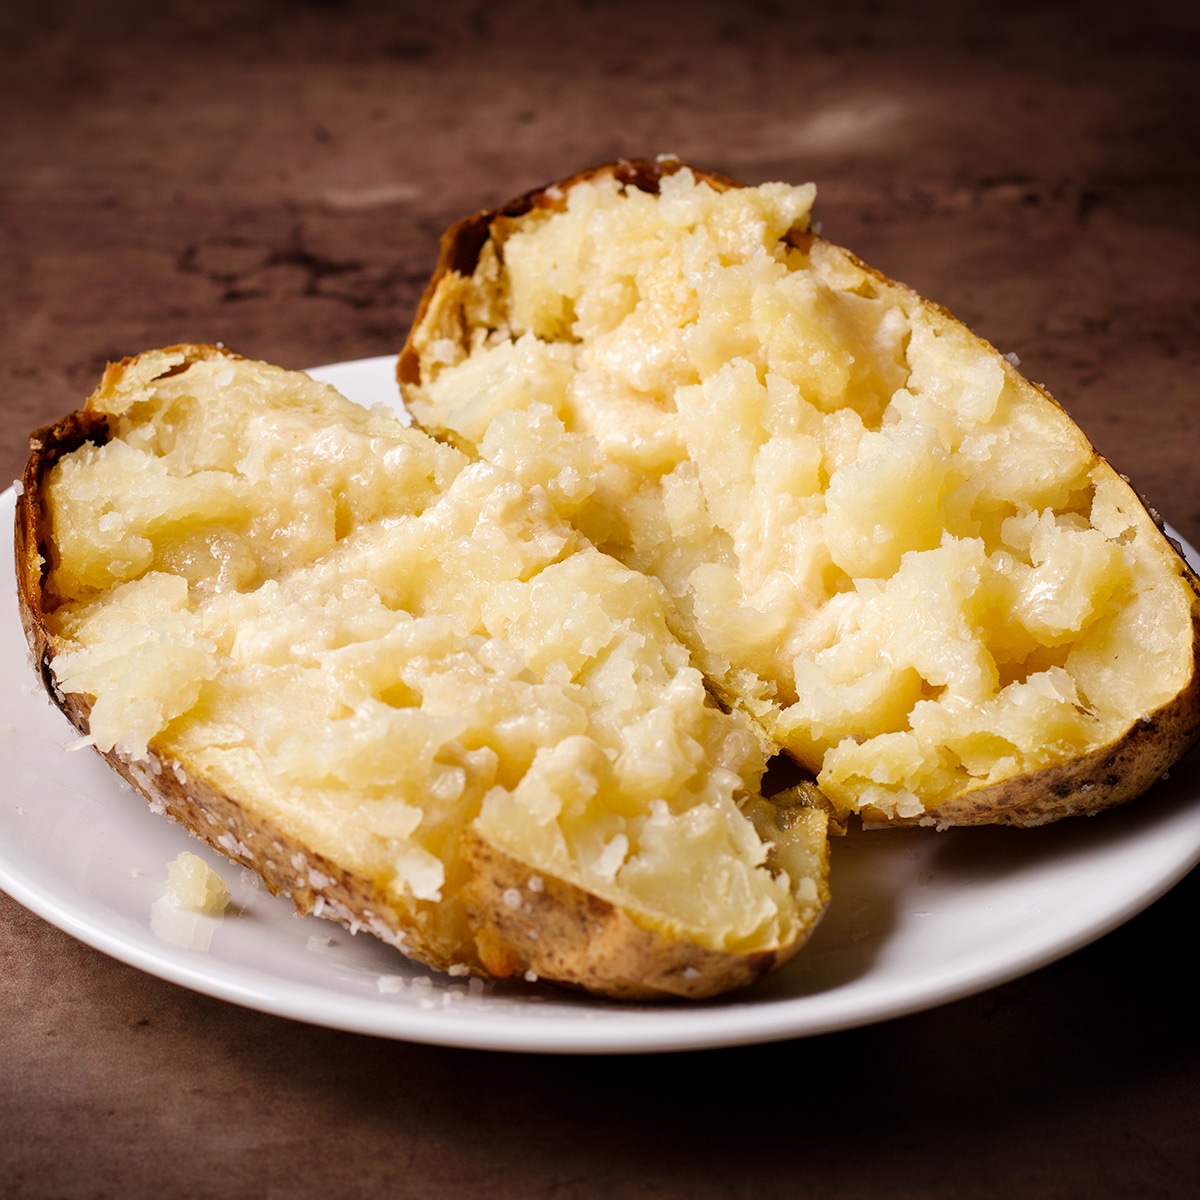 A hot baked potato on a white plate, split in half and ready to eat.